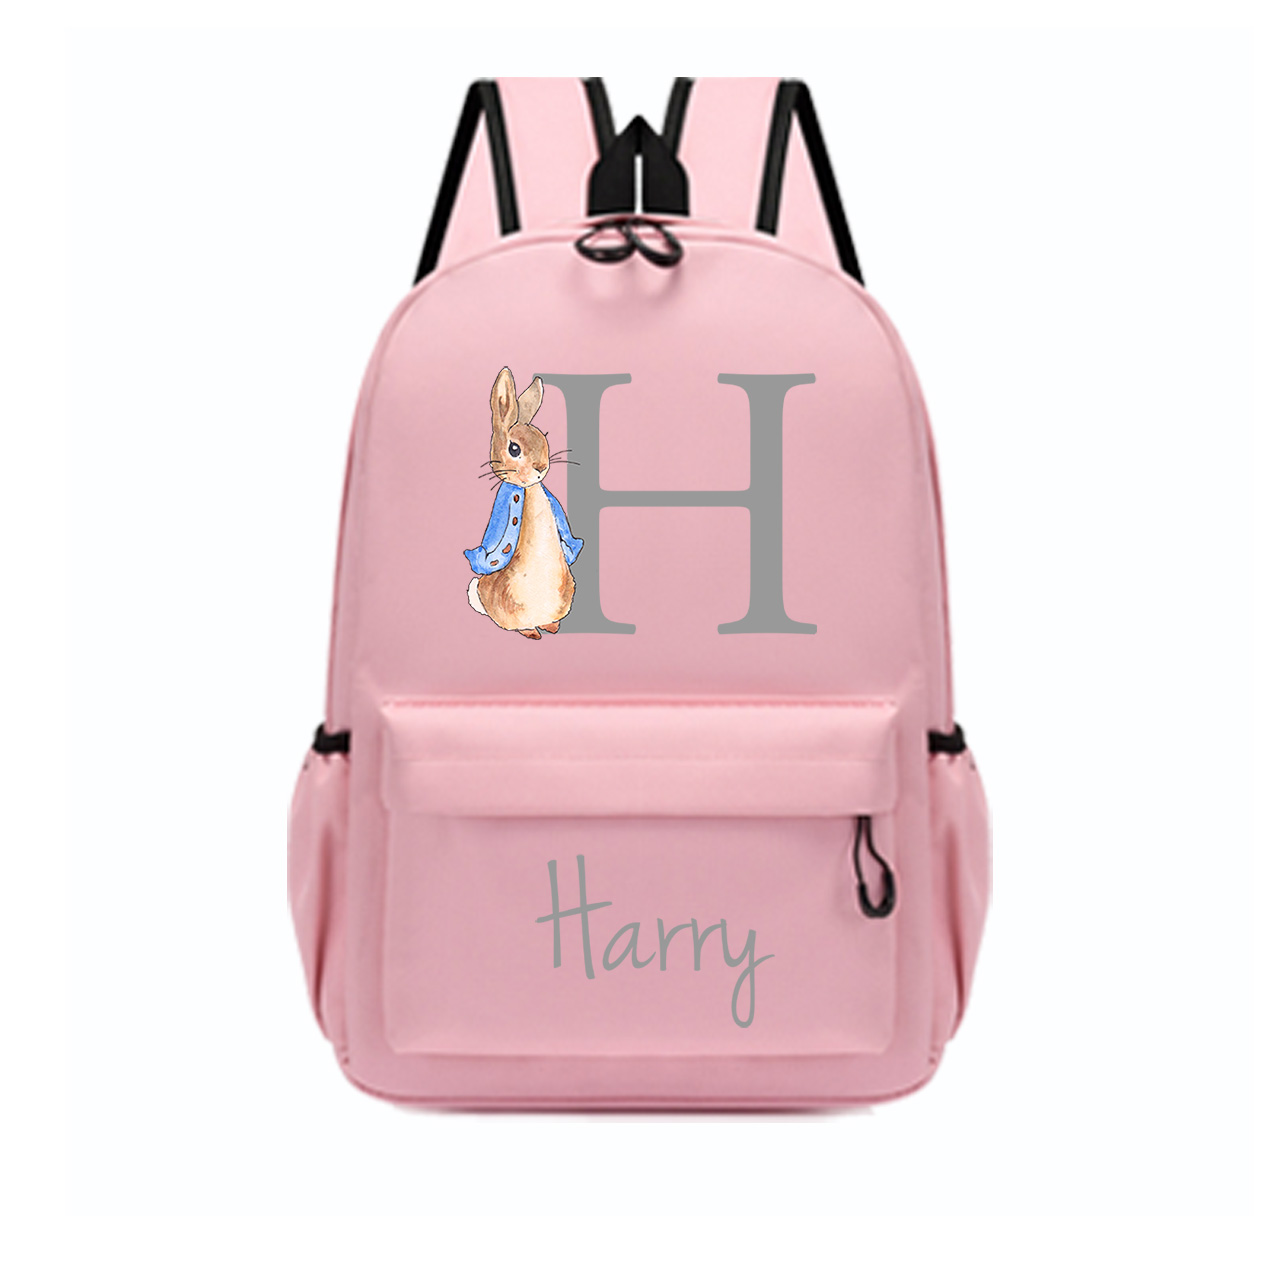 Personalized Name Initial Backpack For School kids